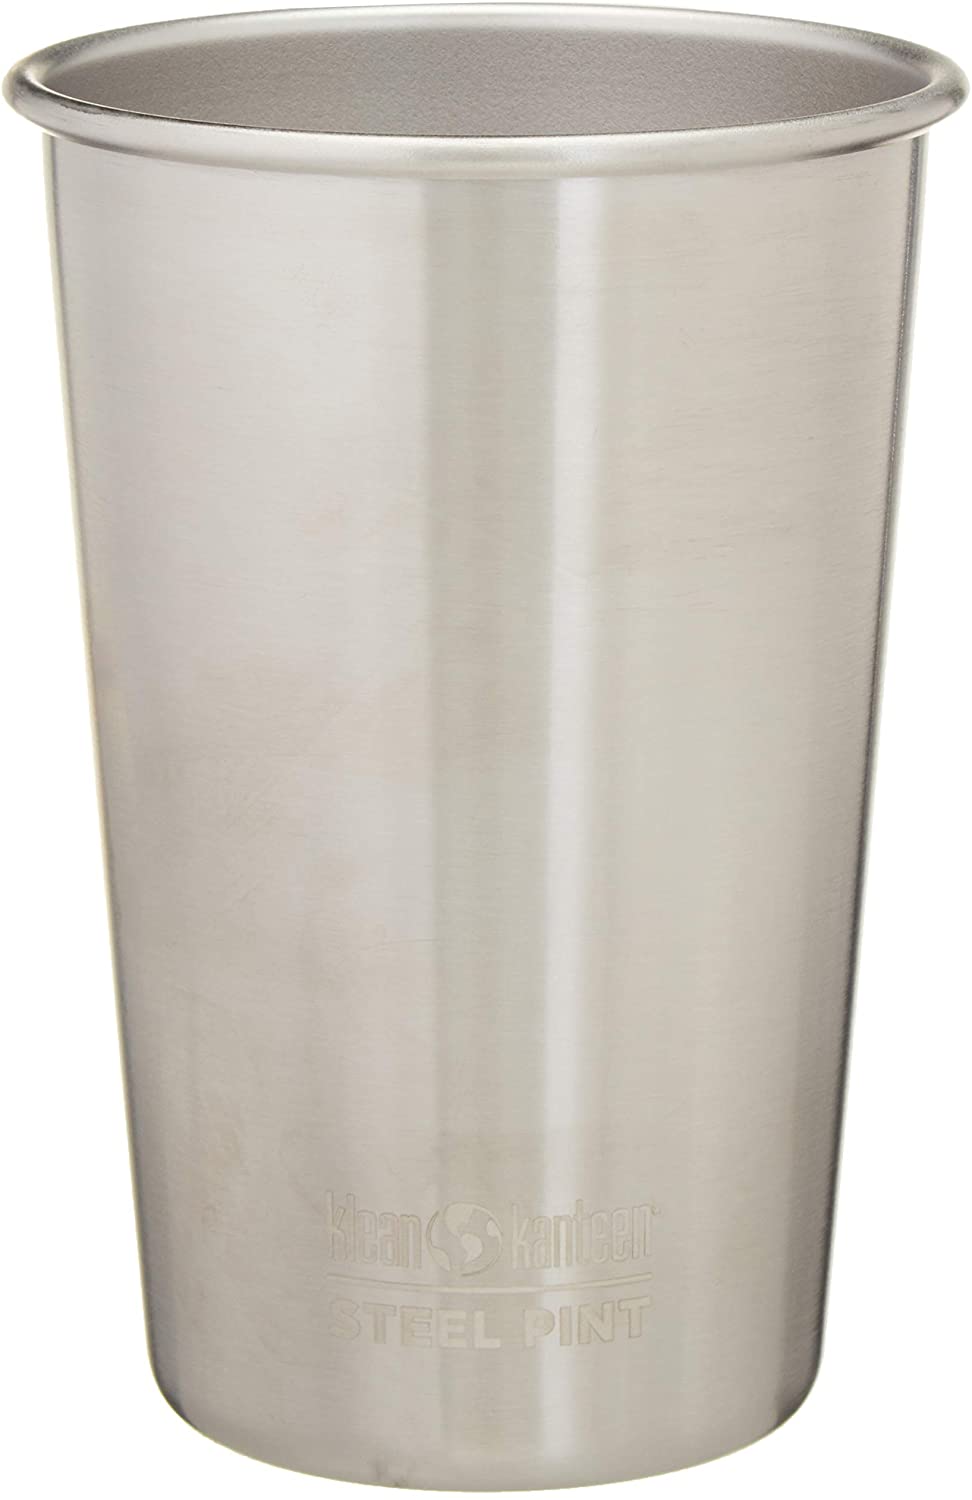 Klean Kanteen Single Wall Stainless Steel Cups, Pint Glasses in 10oz/16oz/20oz - Brushed Stainless